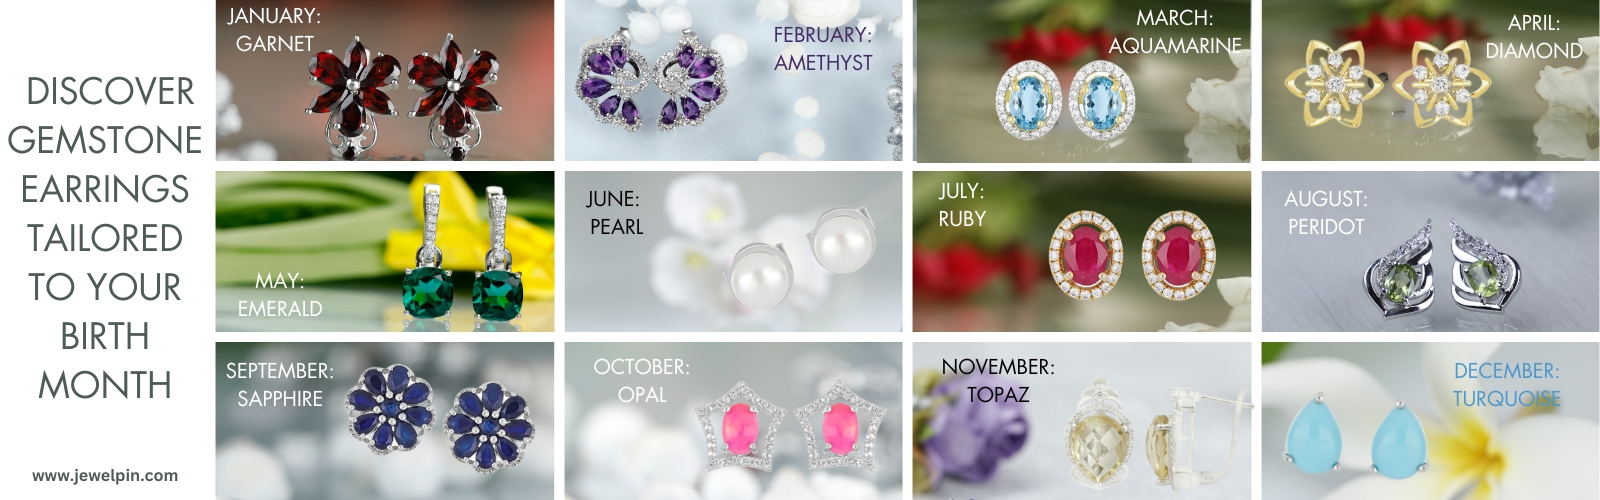 discover gemstone earrings tailored to your birth month